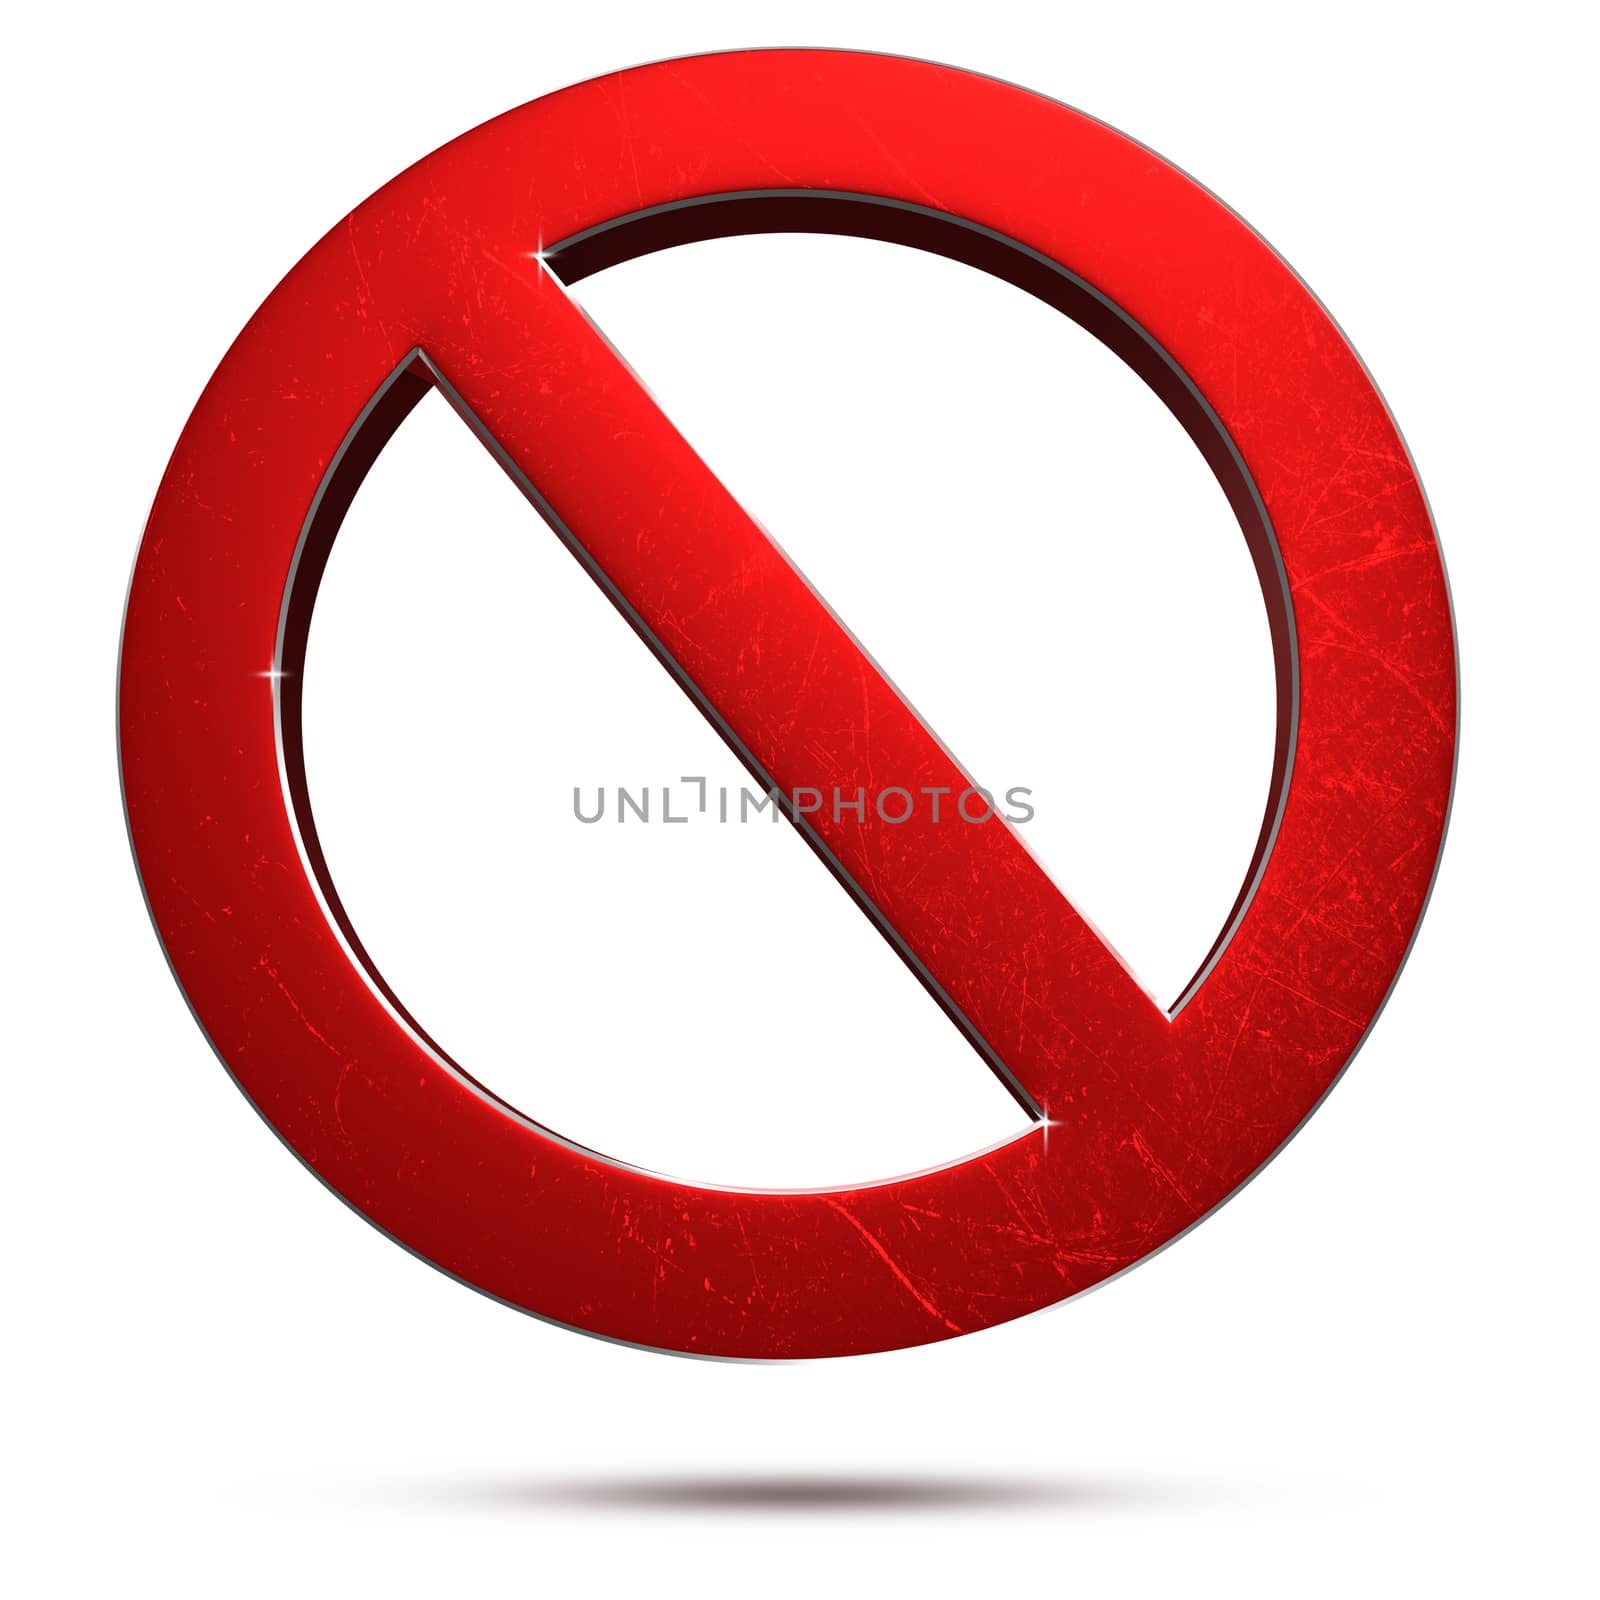 Bright red prohibition sign 3d rendering on white background.(with Clipping Path).